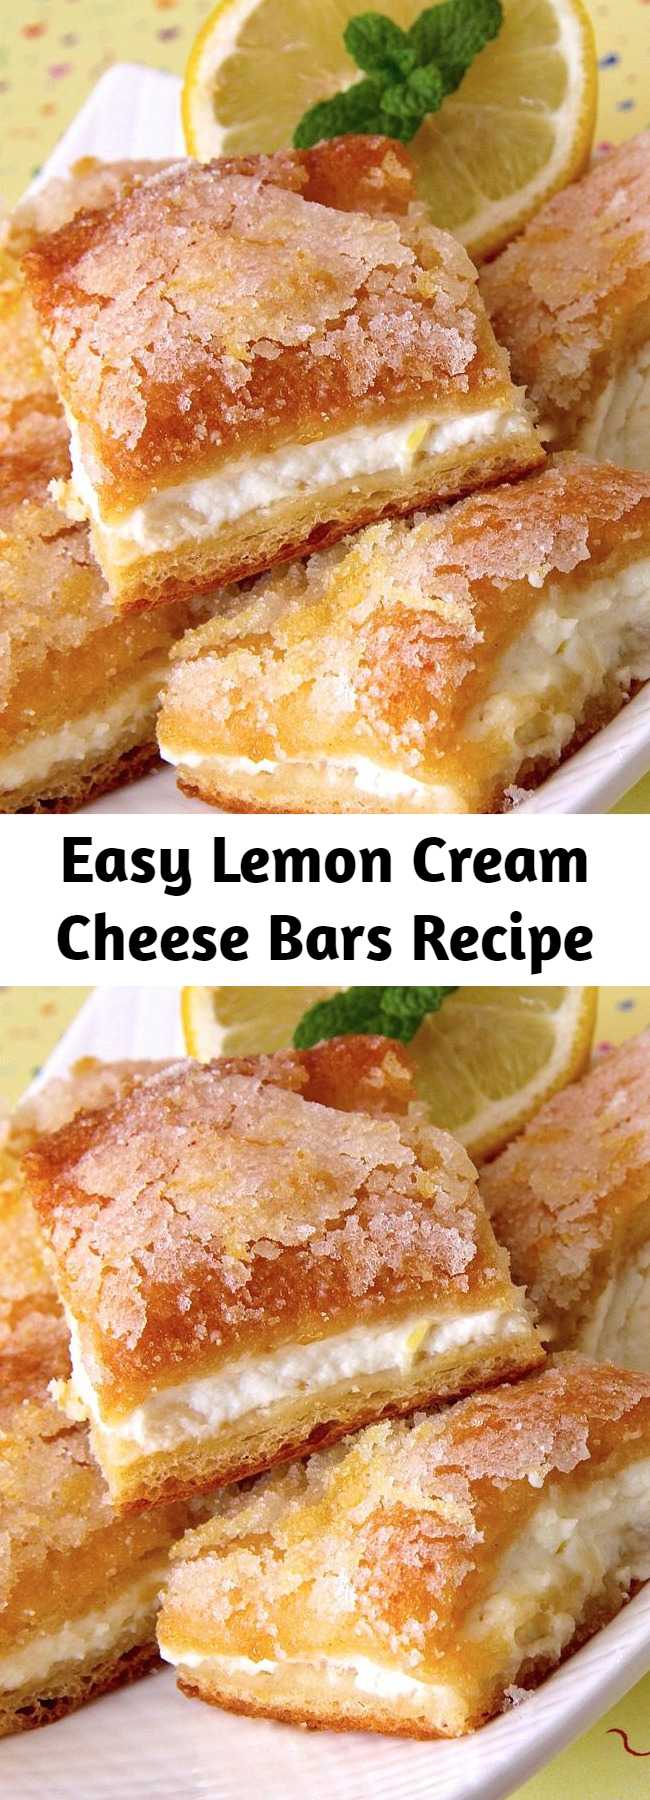 Easy Lemon Cream Cheese Bars Recipe - Lemon Cream Cheese Bars are tangy, sweet, soft, chewy and perfectly delicious. These tasty treats are always a crowd pleaser!